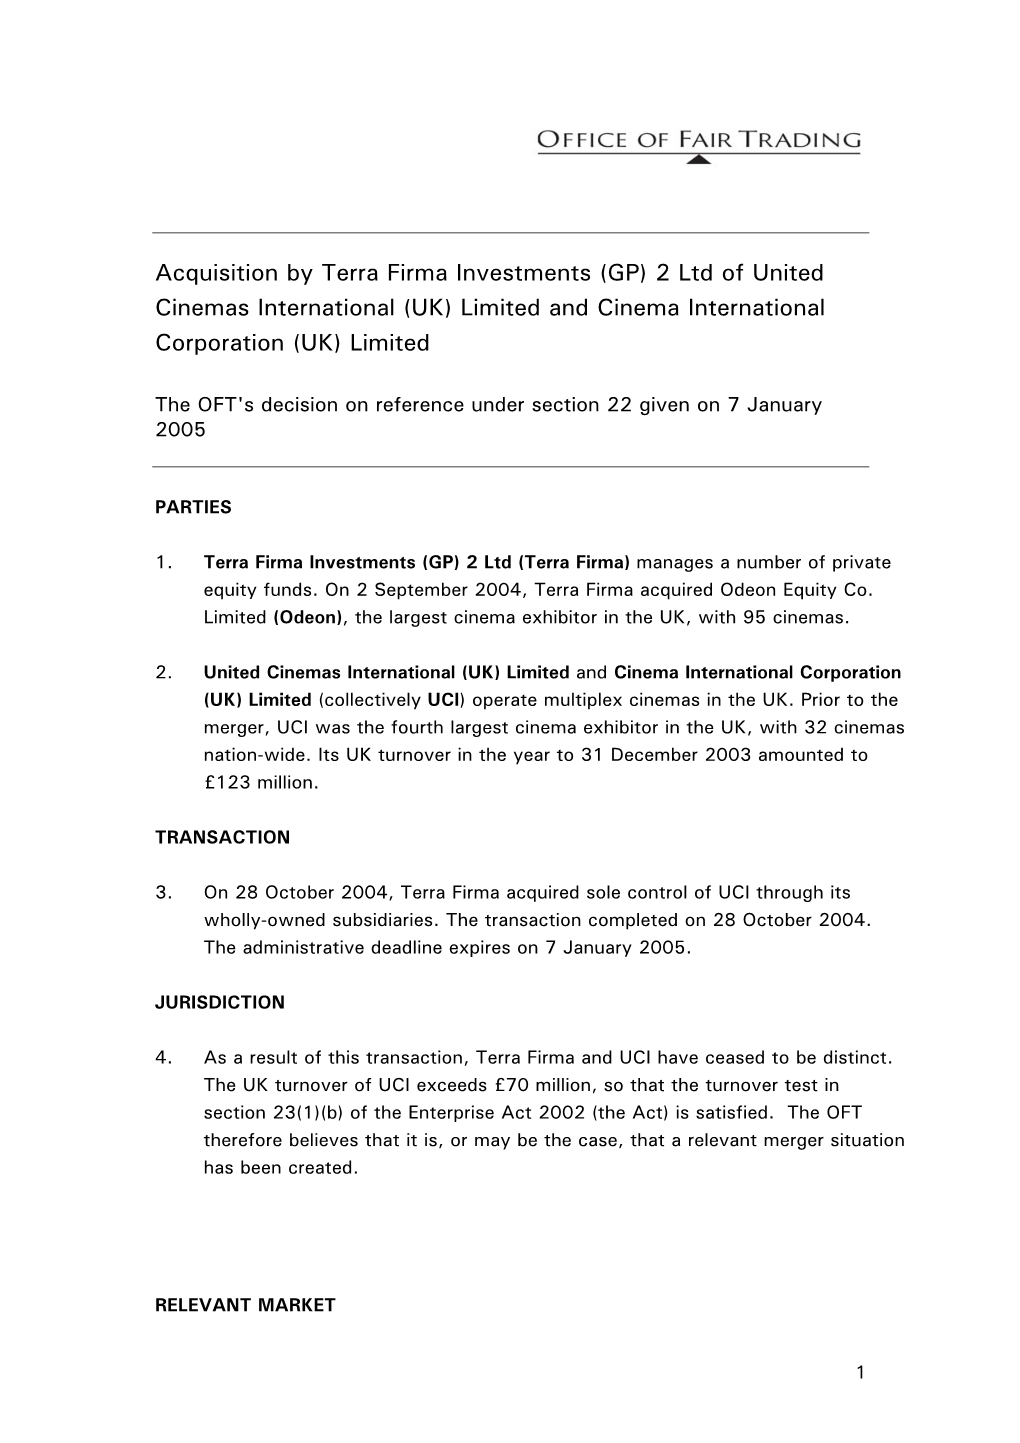 Acquisition by Terra Firma Investments (GP) 2 Ltd of United Cinemas International (UK) Limited and Cinema International Corporation (UK) Limited